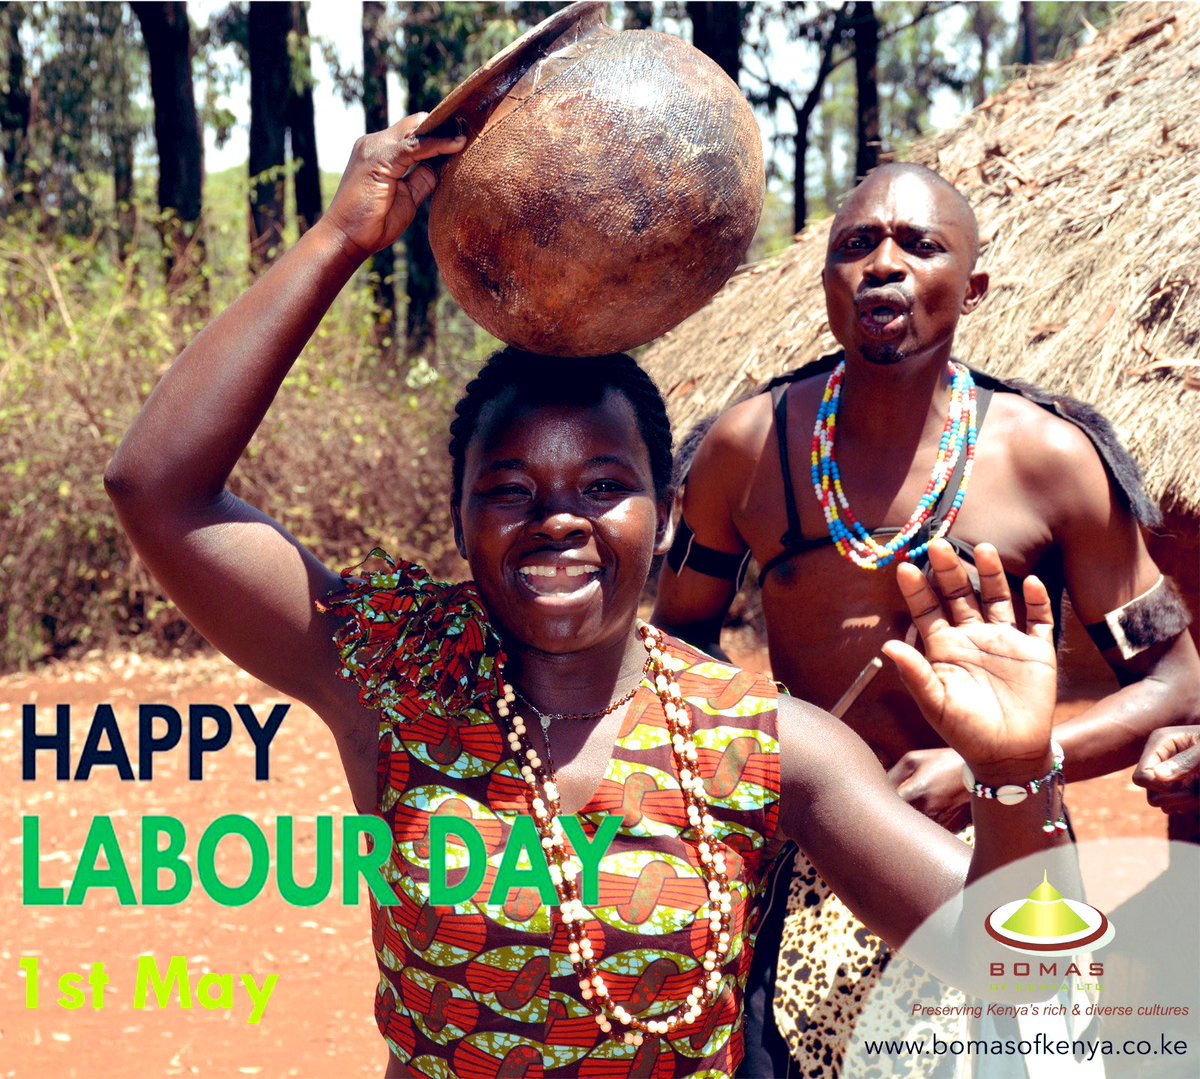 Today, we honor the hard work, dedication, and contributions of workers everywhere. Your commitment builds our nation, strengthens our communities, and fuels our progress. Wishing everyone a restful and rewarding Labour Day! #HappyLabourDay #BomasOfKenya 🇰🇪✨